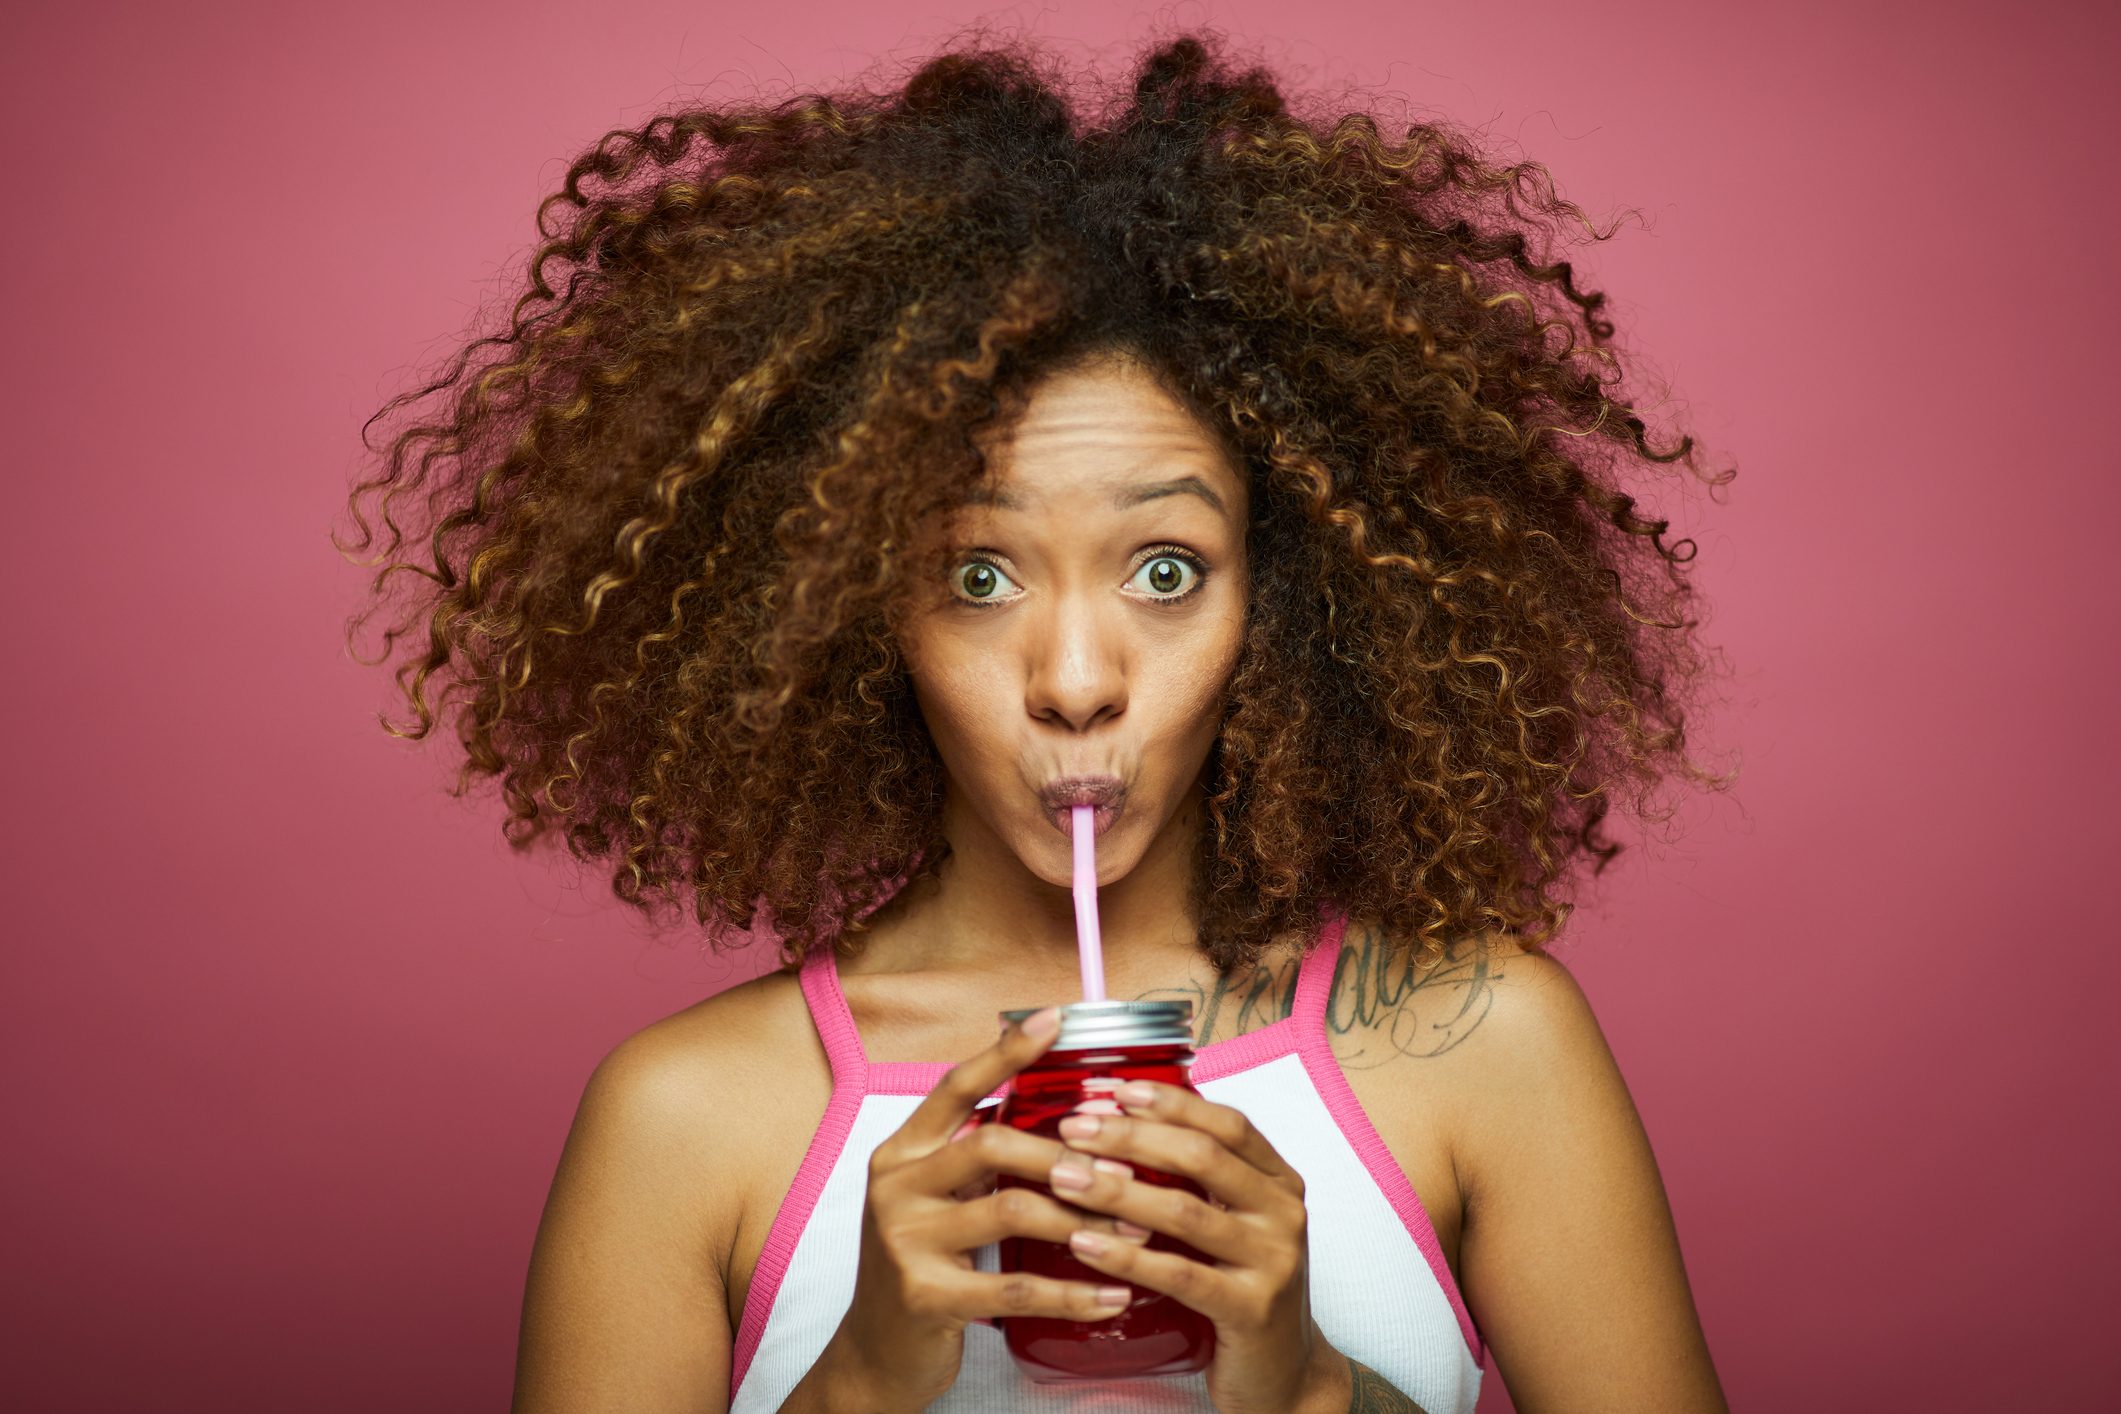 Do Straws Actually Cause Wrinkles? Dermatologists to Weigh In on